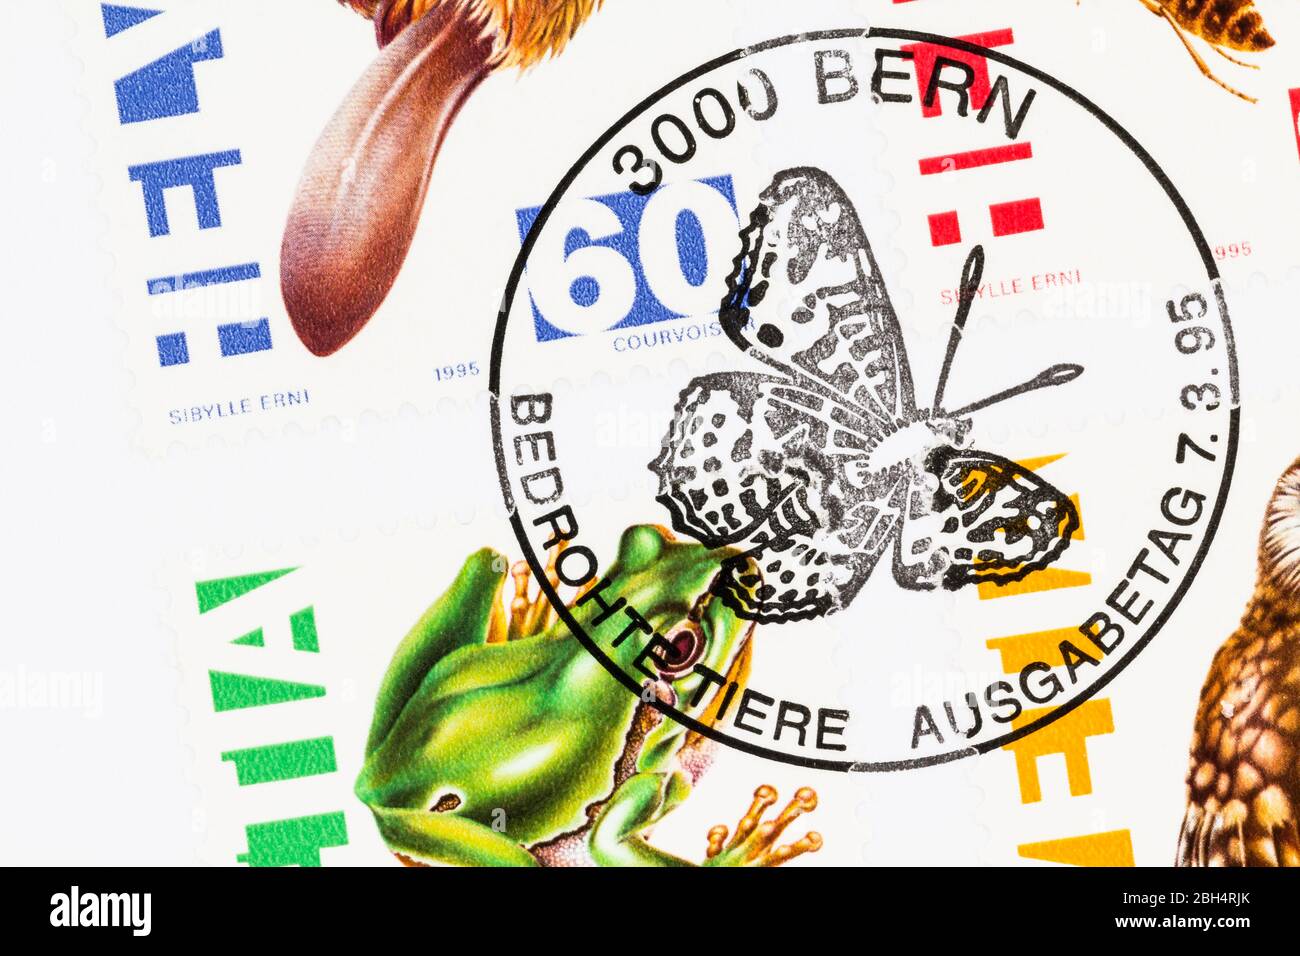 SEATTLE WASHINGTON - April 21, 2020:  Switzerland First Day Cover close up of postmark on Endangered Species stamps, issue date 7.3.95 Bern. Stock Photo